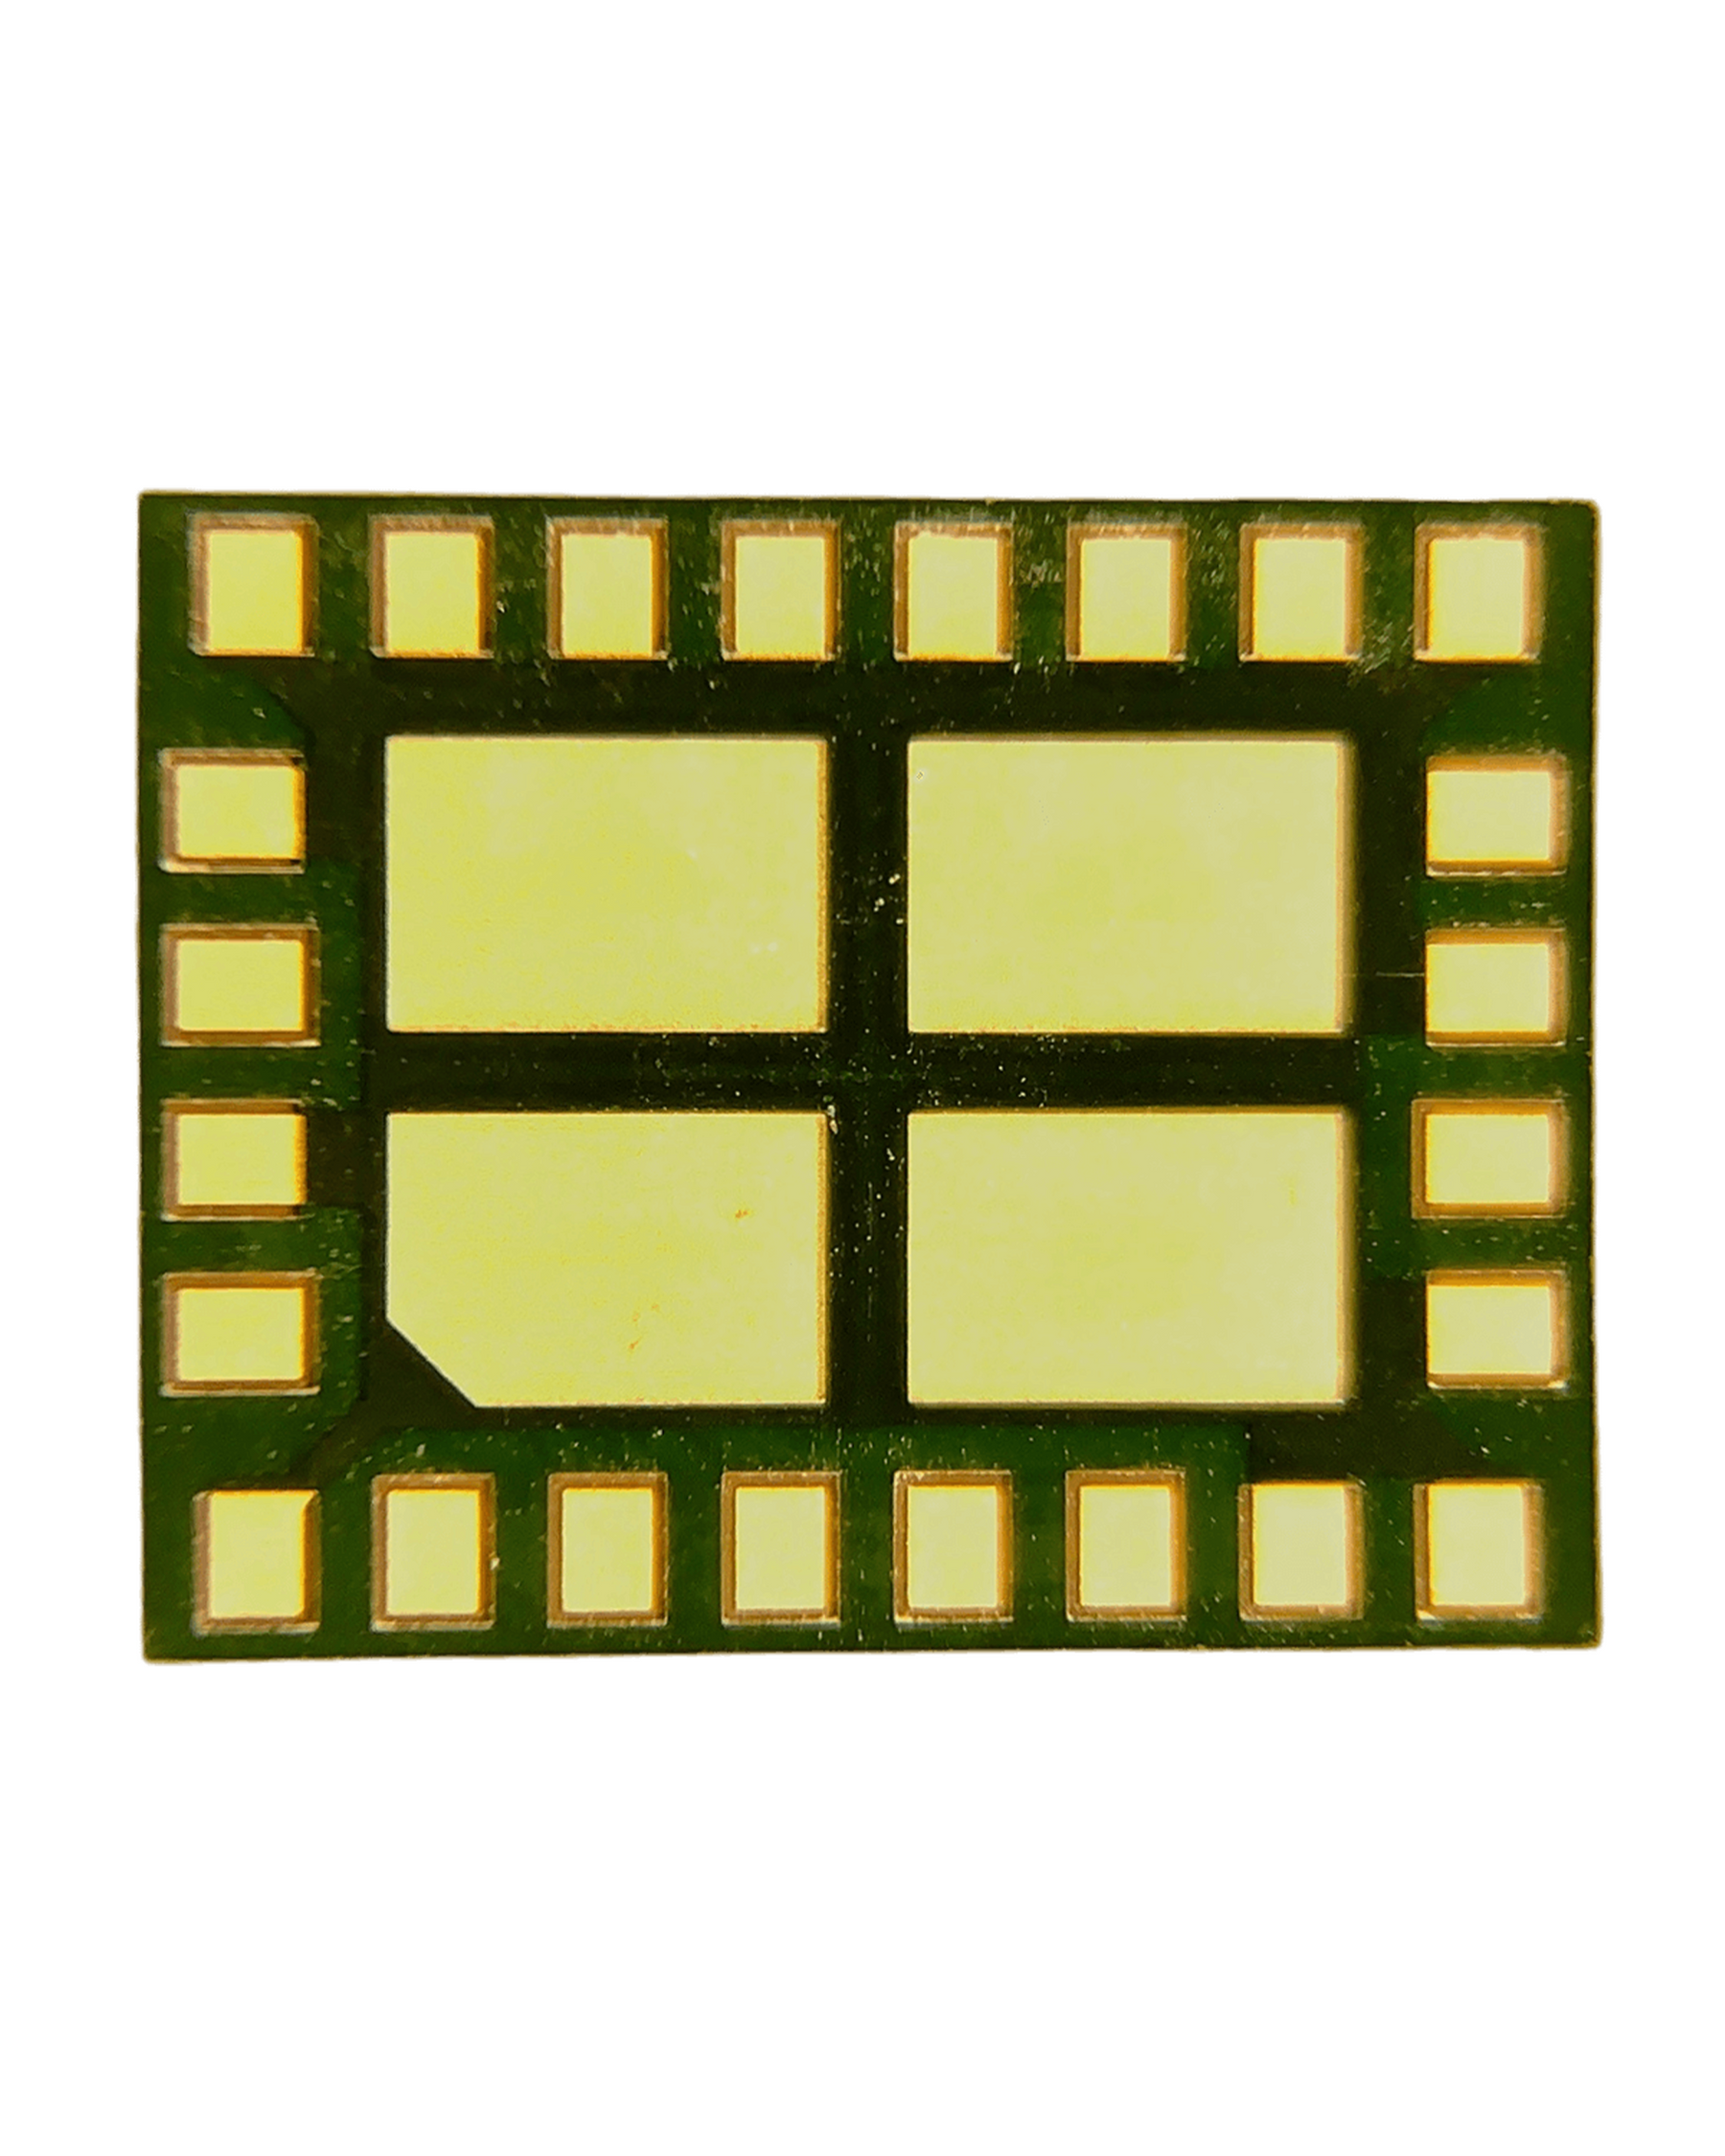 WIFI MODULE IC CHIP COMPATIBLE WITH IPHONE 7 / 7 PLUS (LBLN 13703: 28 PINS)